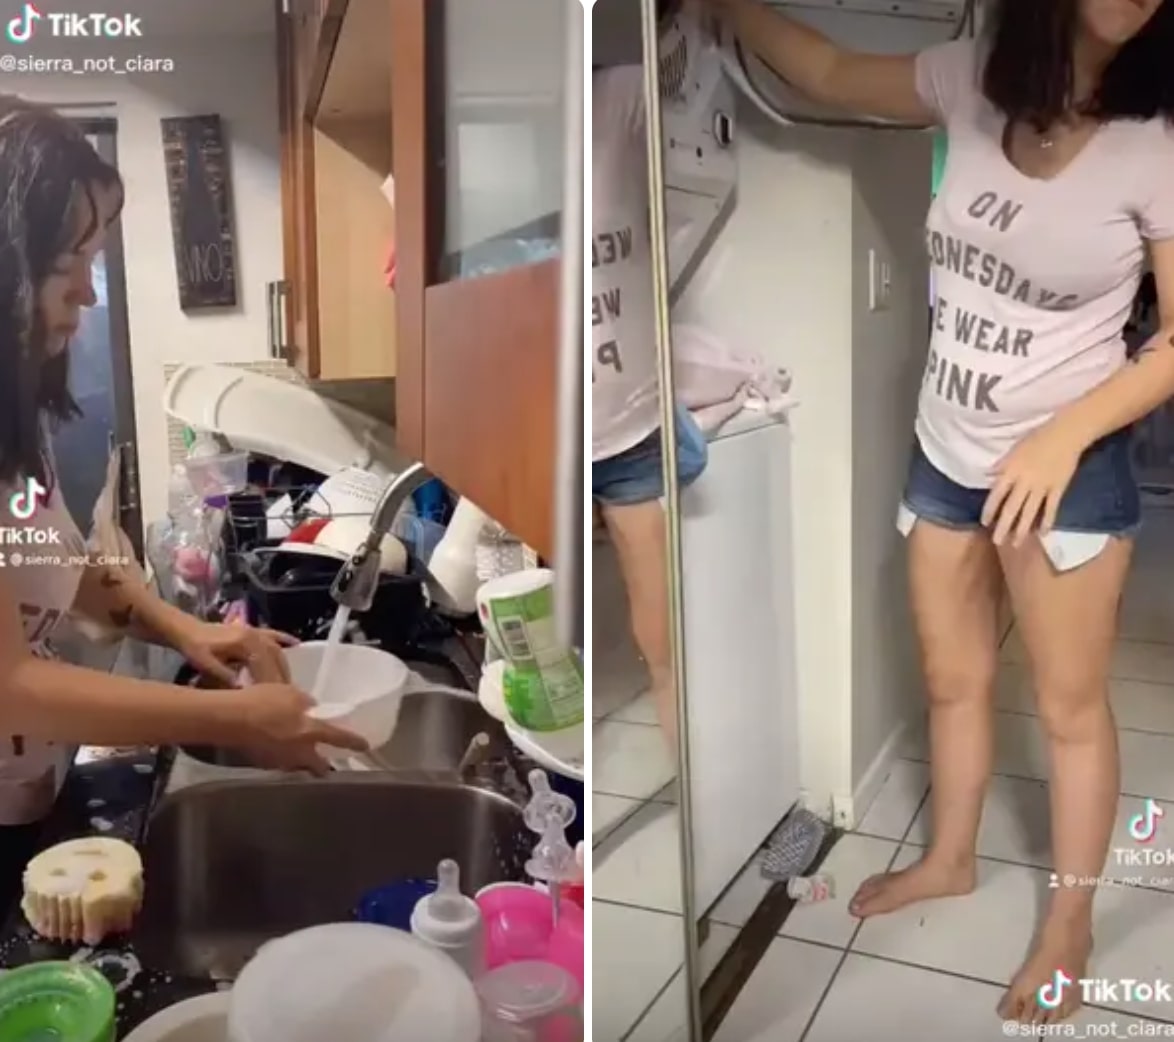 stay-at-home mom's boyfriend asks what she does all day, she decides to film an entire day on tiktok